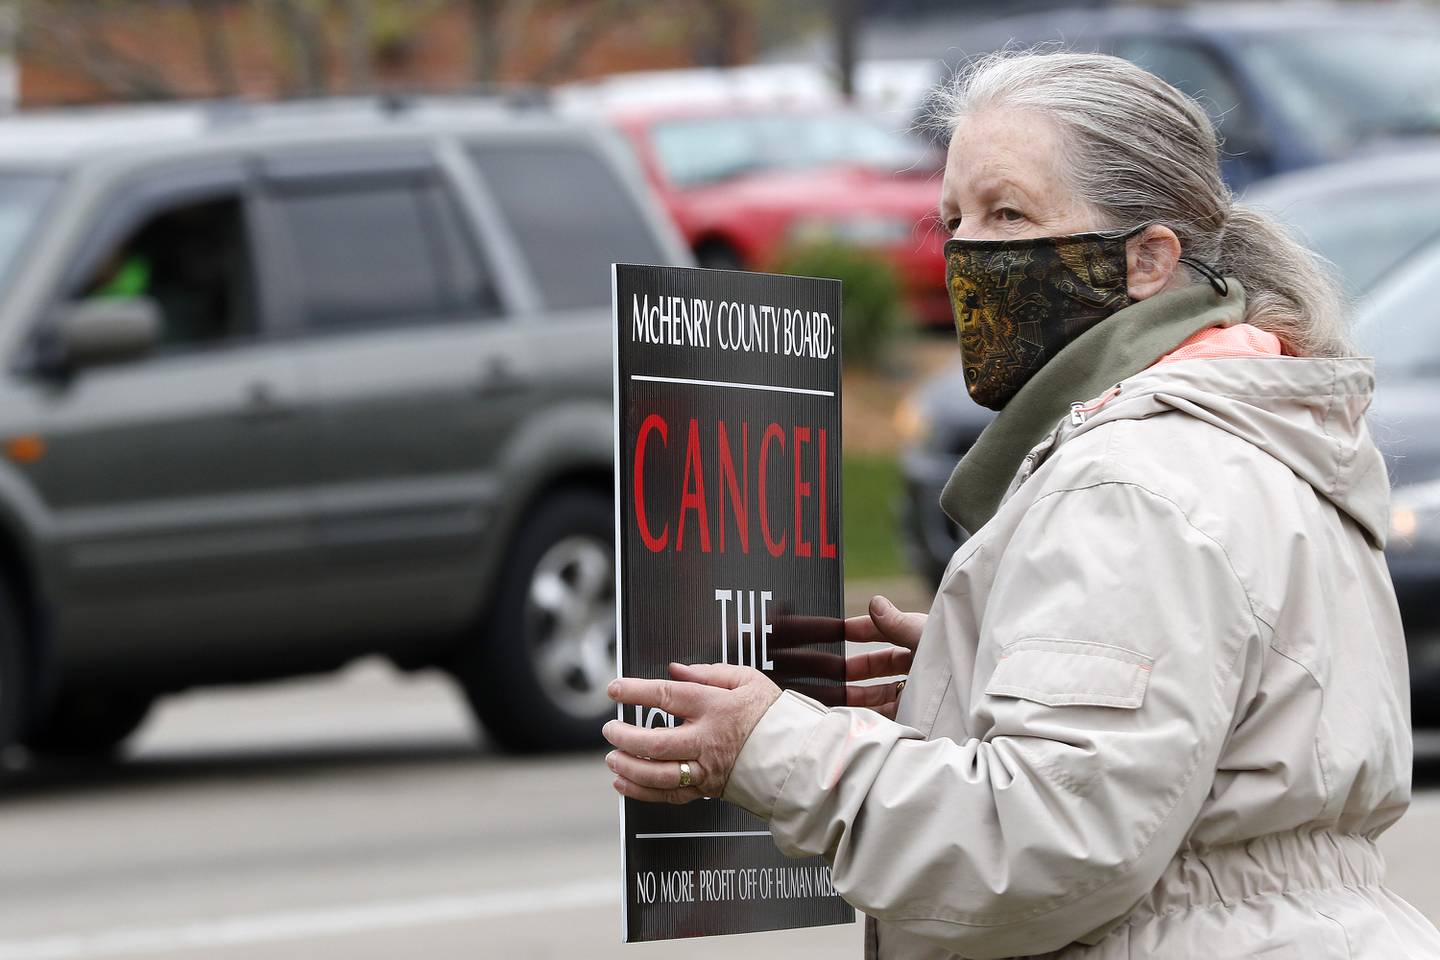 Sue Rekenthaler of Richmond stands near the road for passersby to see her sign in favor of canceling the county's contract with U.S. Immigration and Customs Enforcement during a rally at the intersection of Front and West Elm streets on Saturday, April 24, 2021, in McHenry. "There's got to be a more humane way," Rekenthaler said, adding "it's not solving the problem, but it's a start." Rekenthaler also added that "If we still have to have immigration and custom enforcement, to look into cheaper ways of detaining people. (Canceling the ICE contract) will discontinue paying some of the county's bills and will show our elected officials we do not want to make money off of a flawed system."